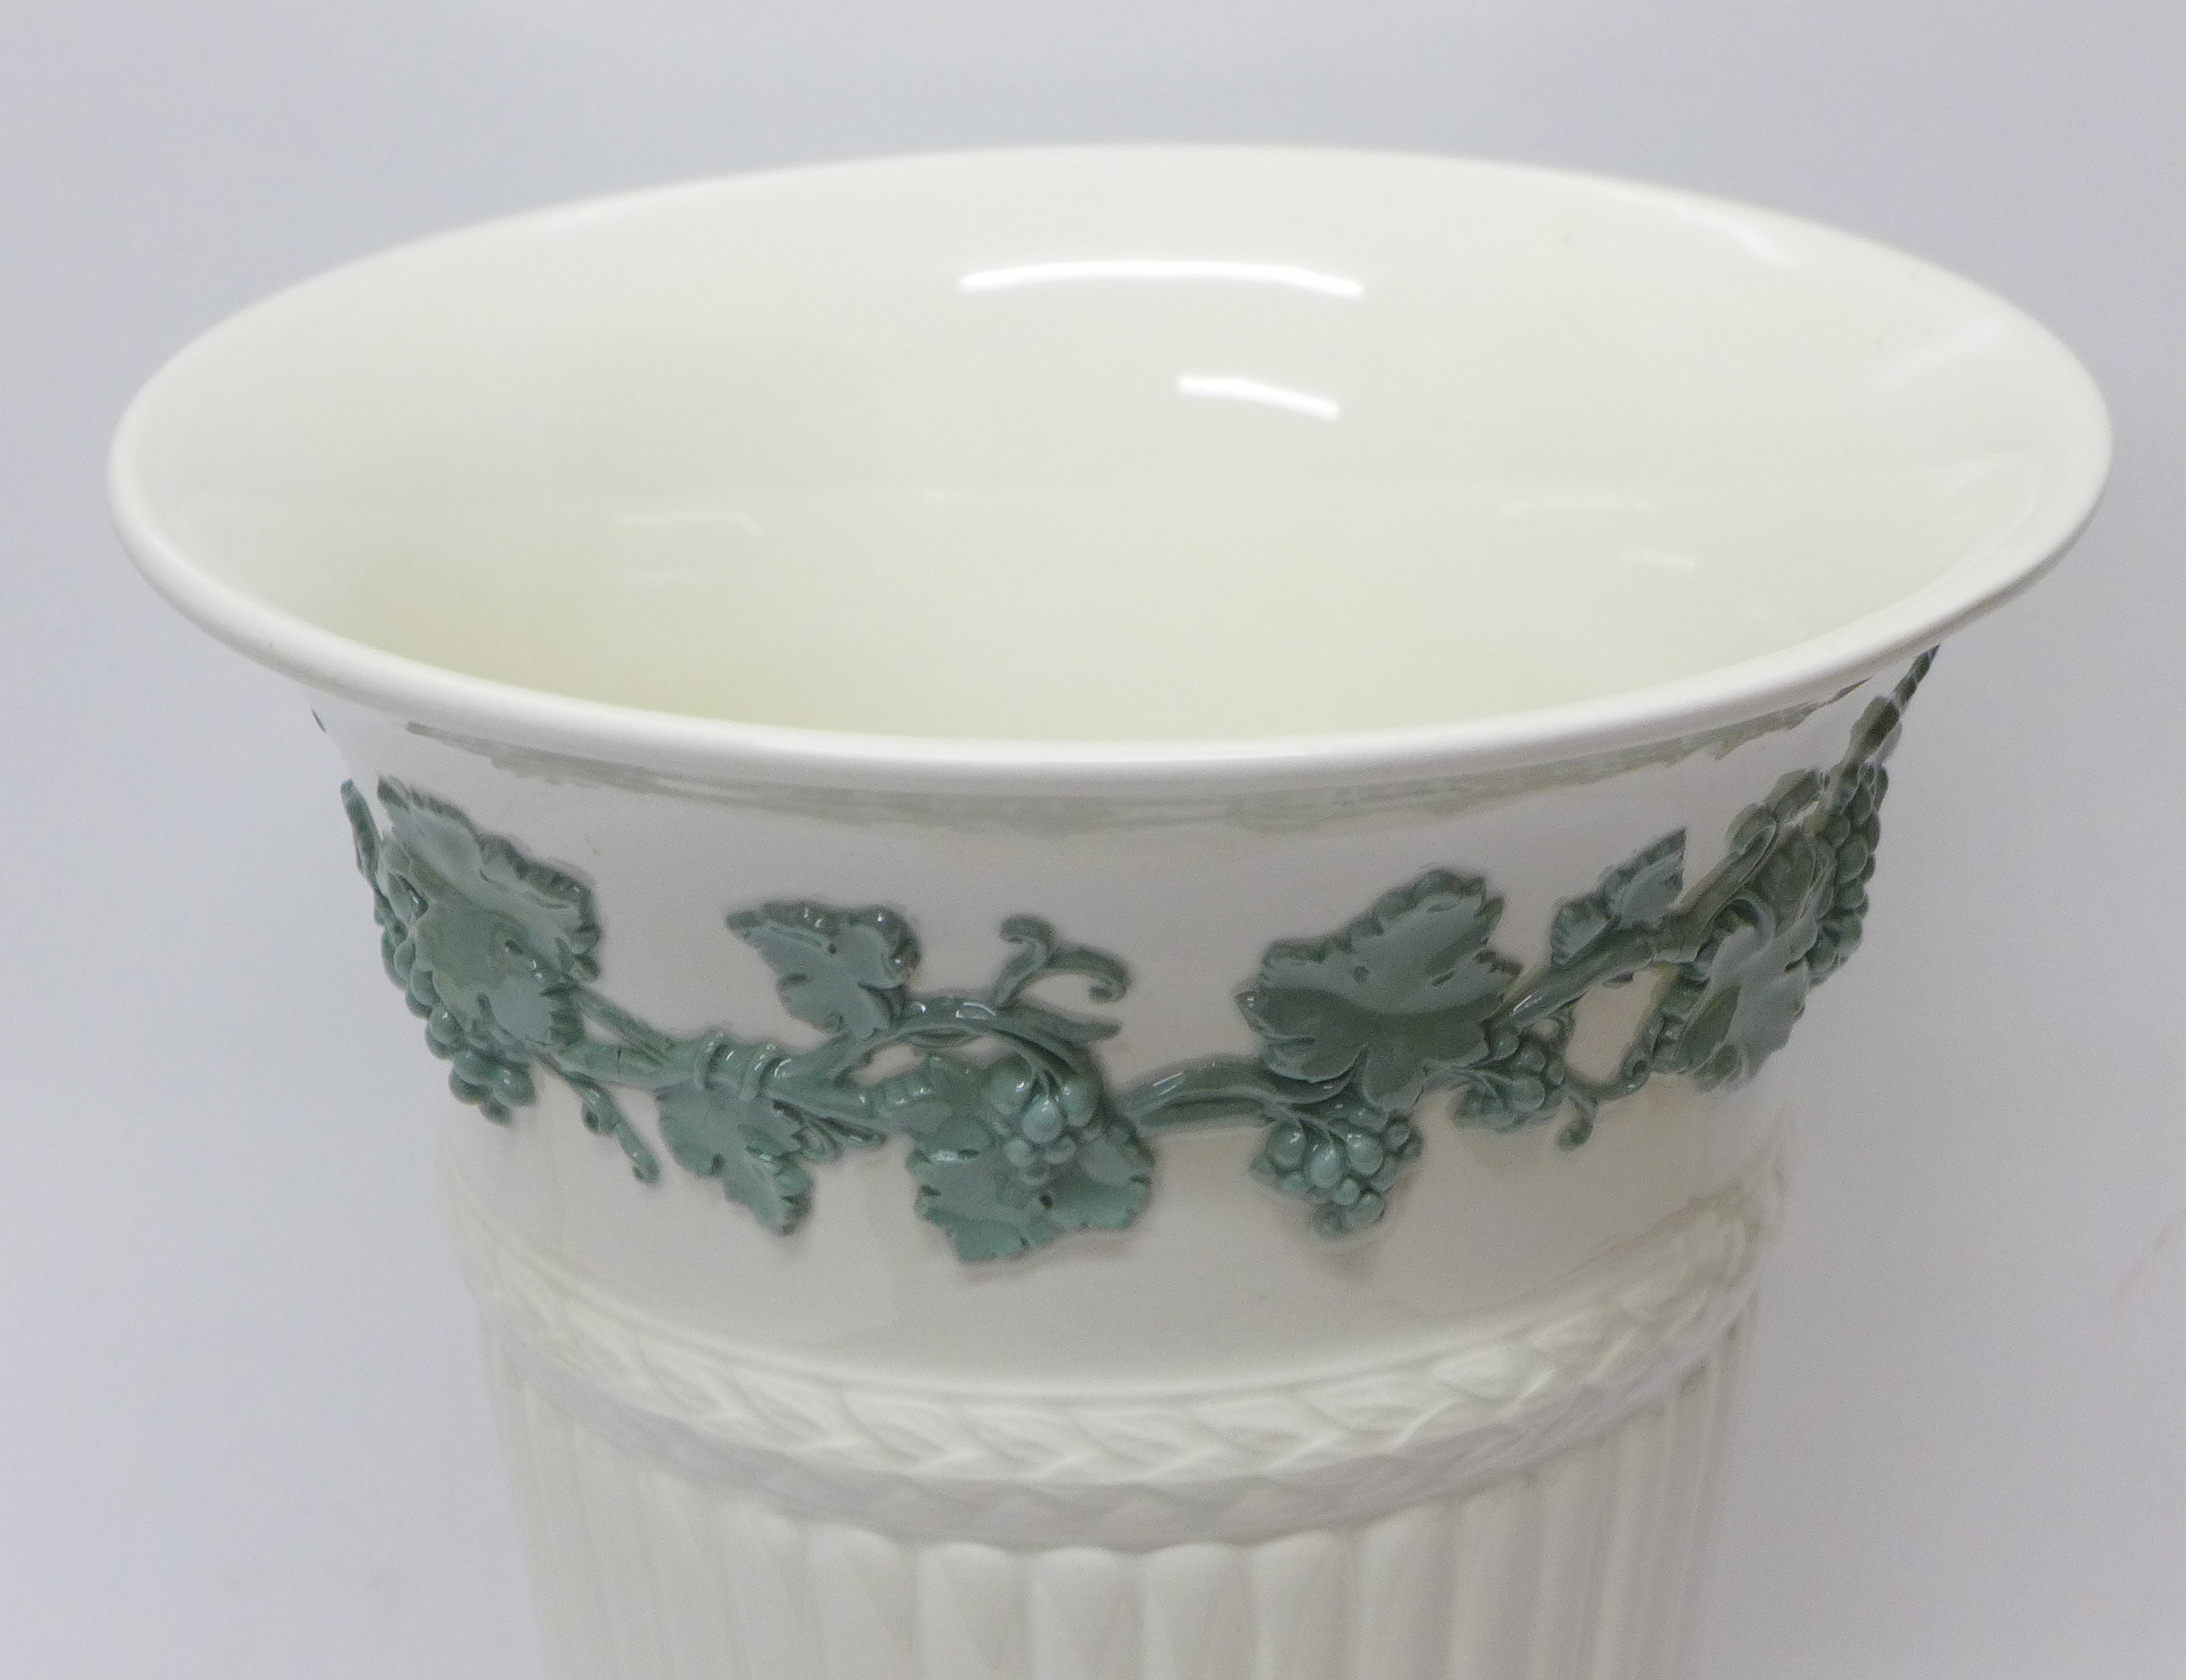 A Wedgwood embossed Queen's ware vase, - Image 2 of 3